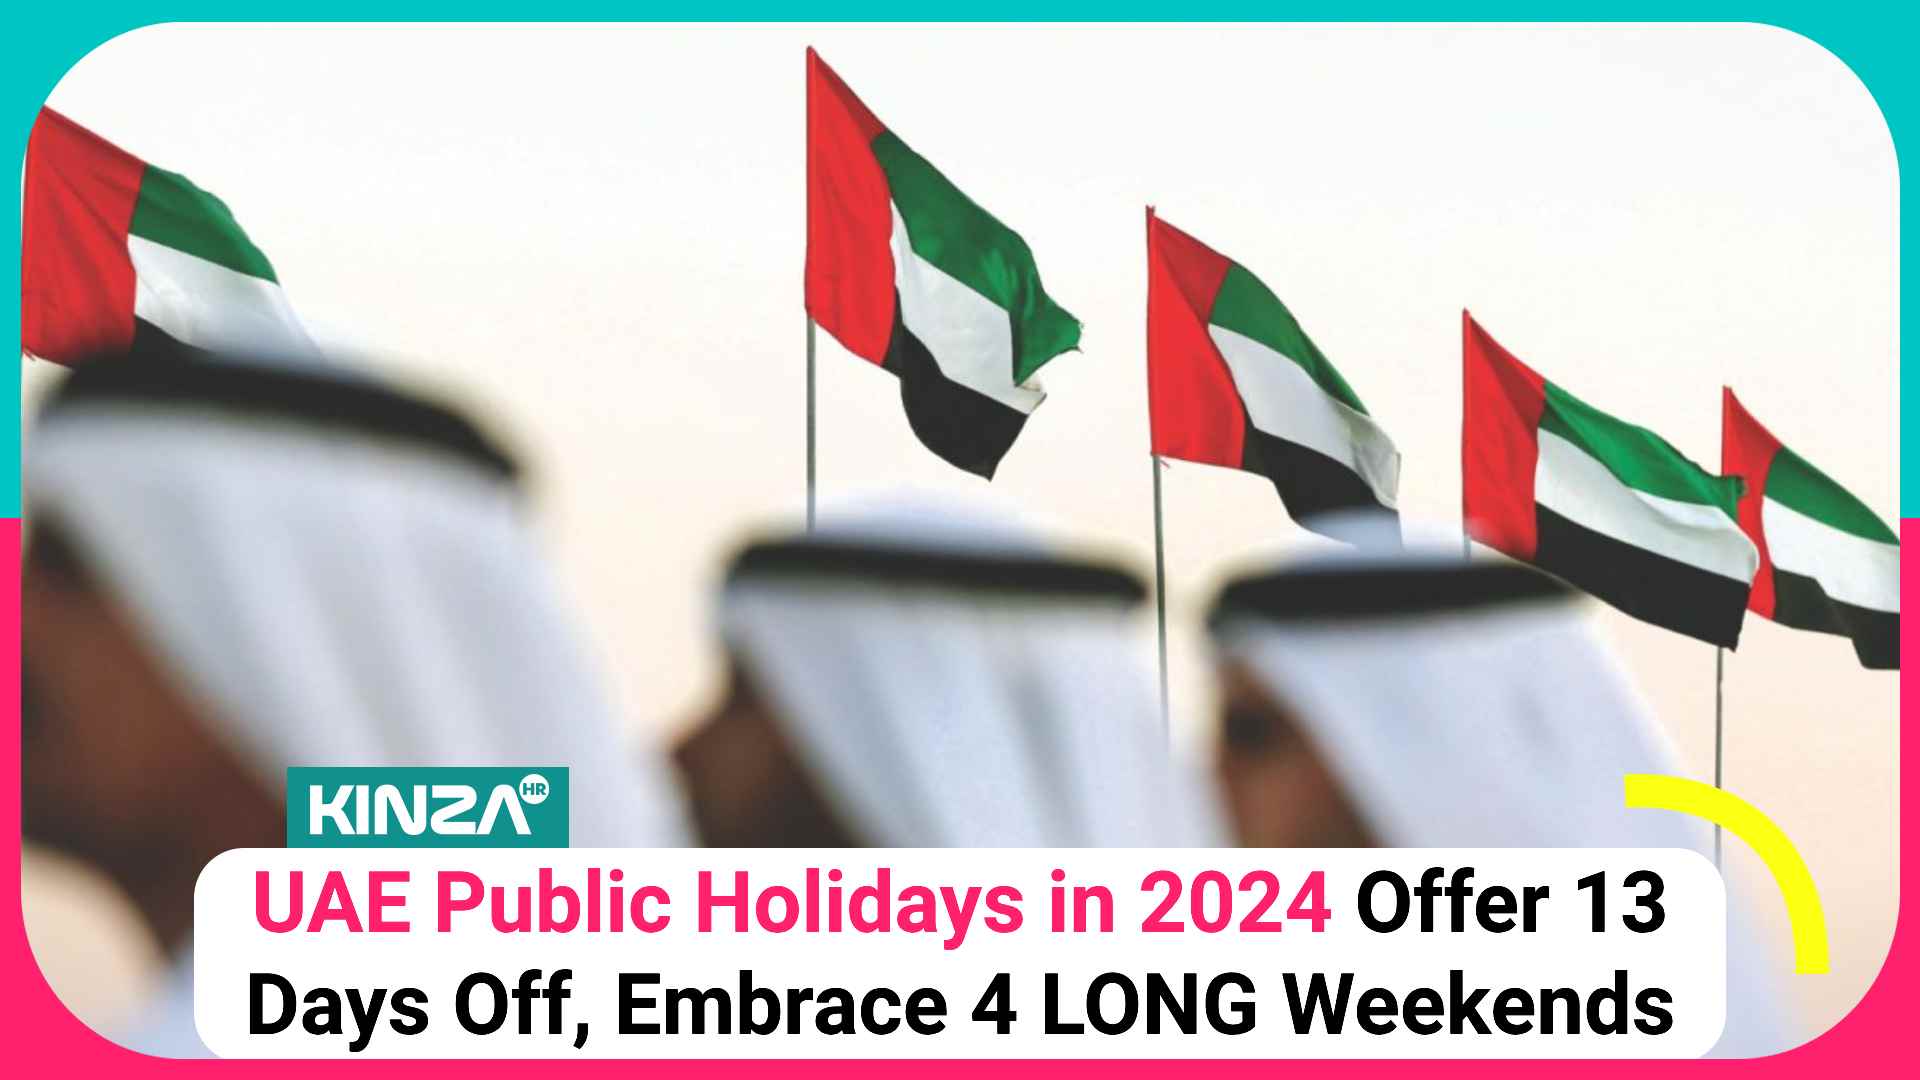 UAE Public Holidays in 2024 Offer 13 Days Off, Embrace 4 LONG Weekends